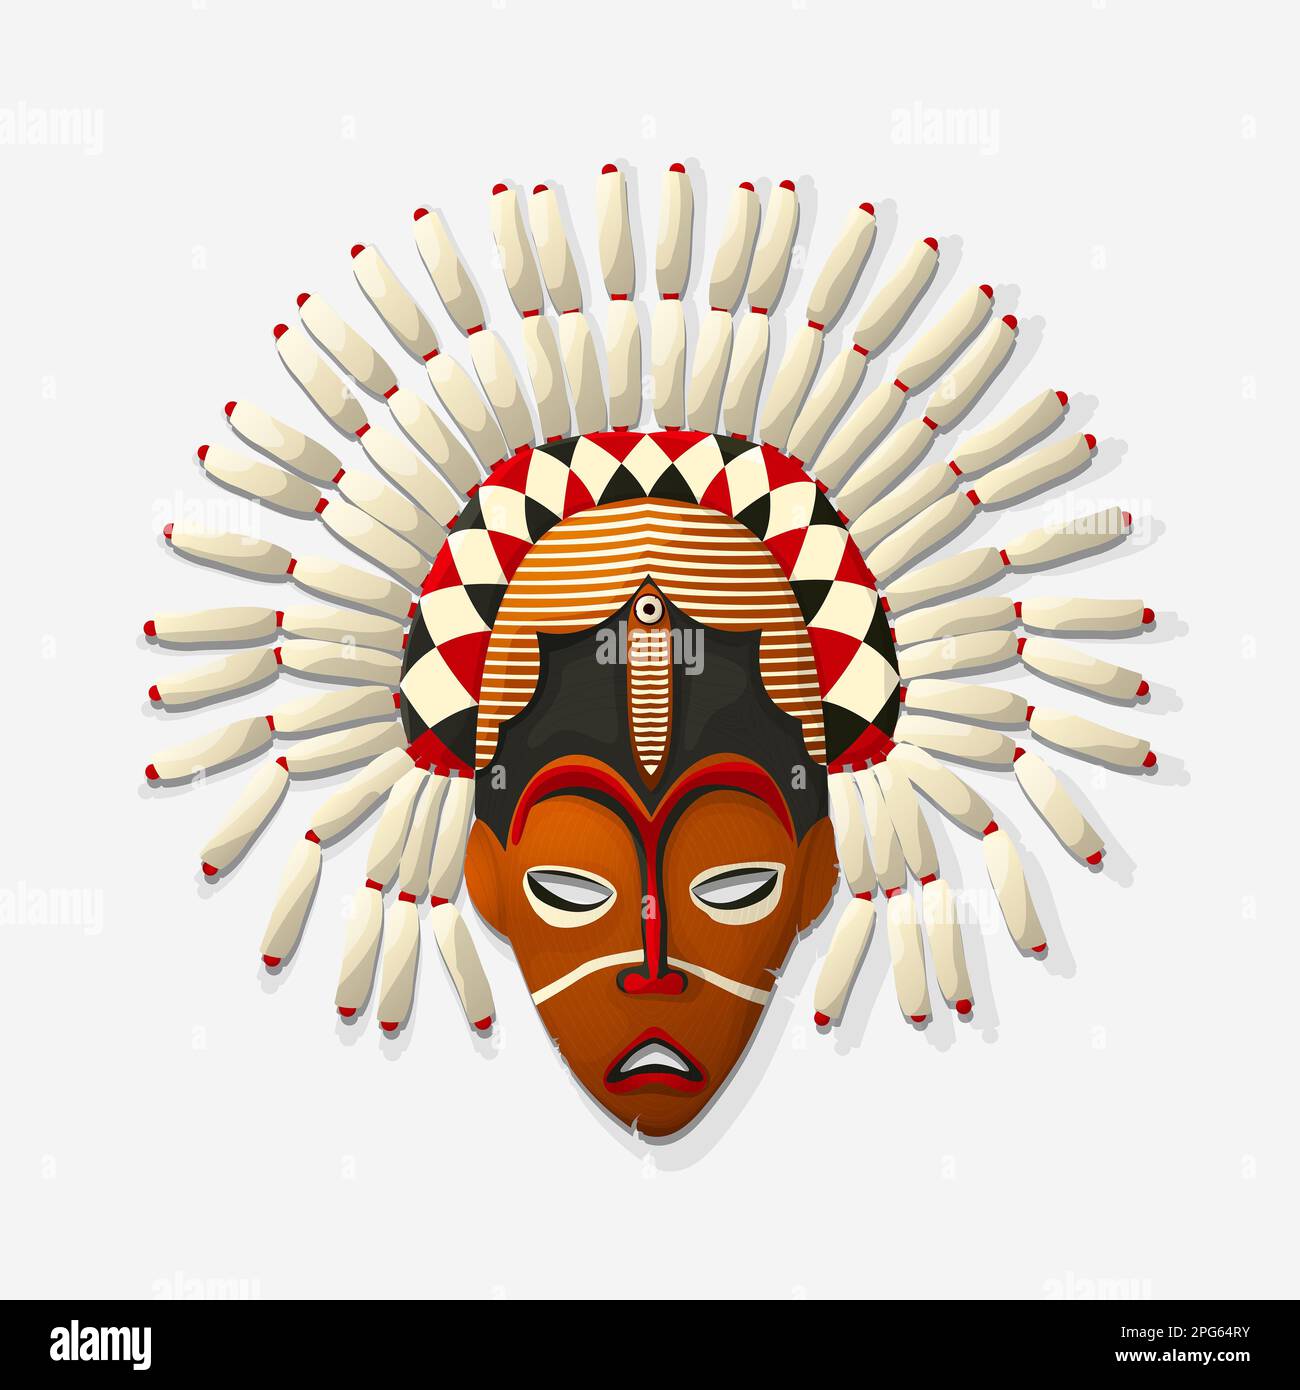 Wooden tribal mask drawing, vector illustration Stock Photo - Alamy